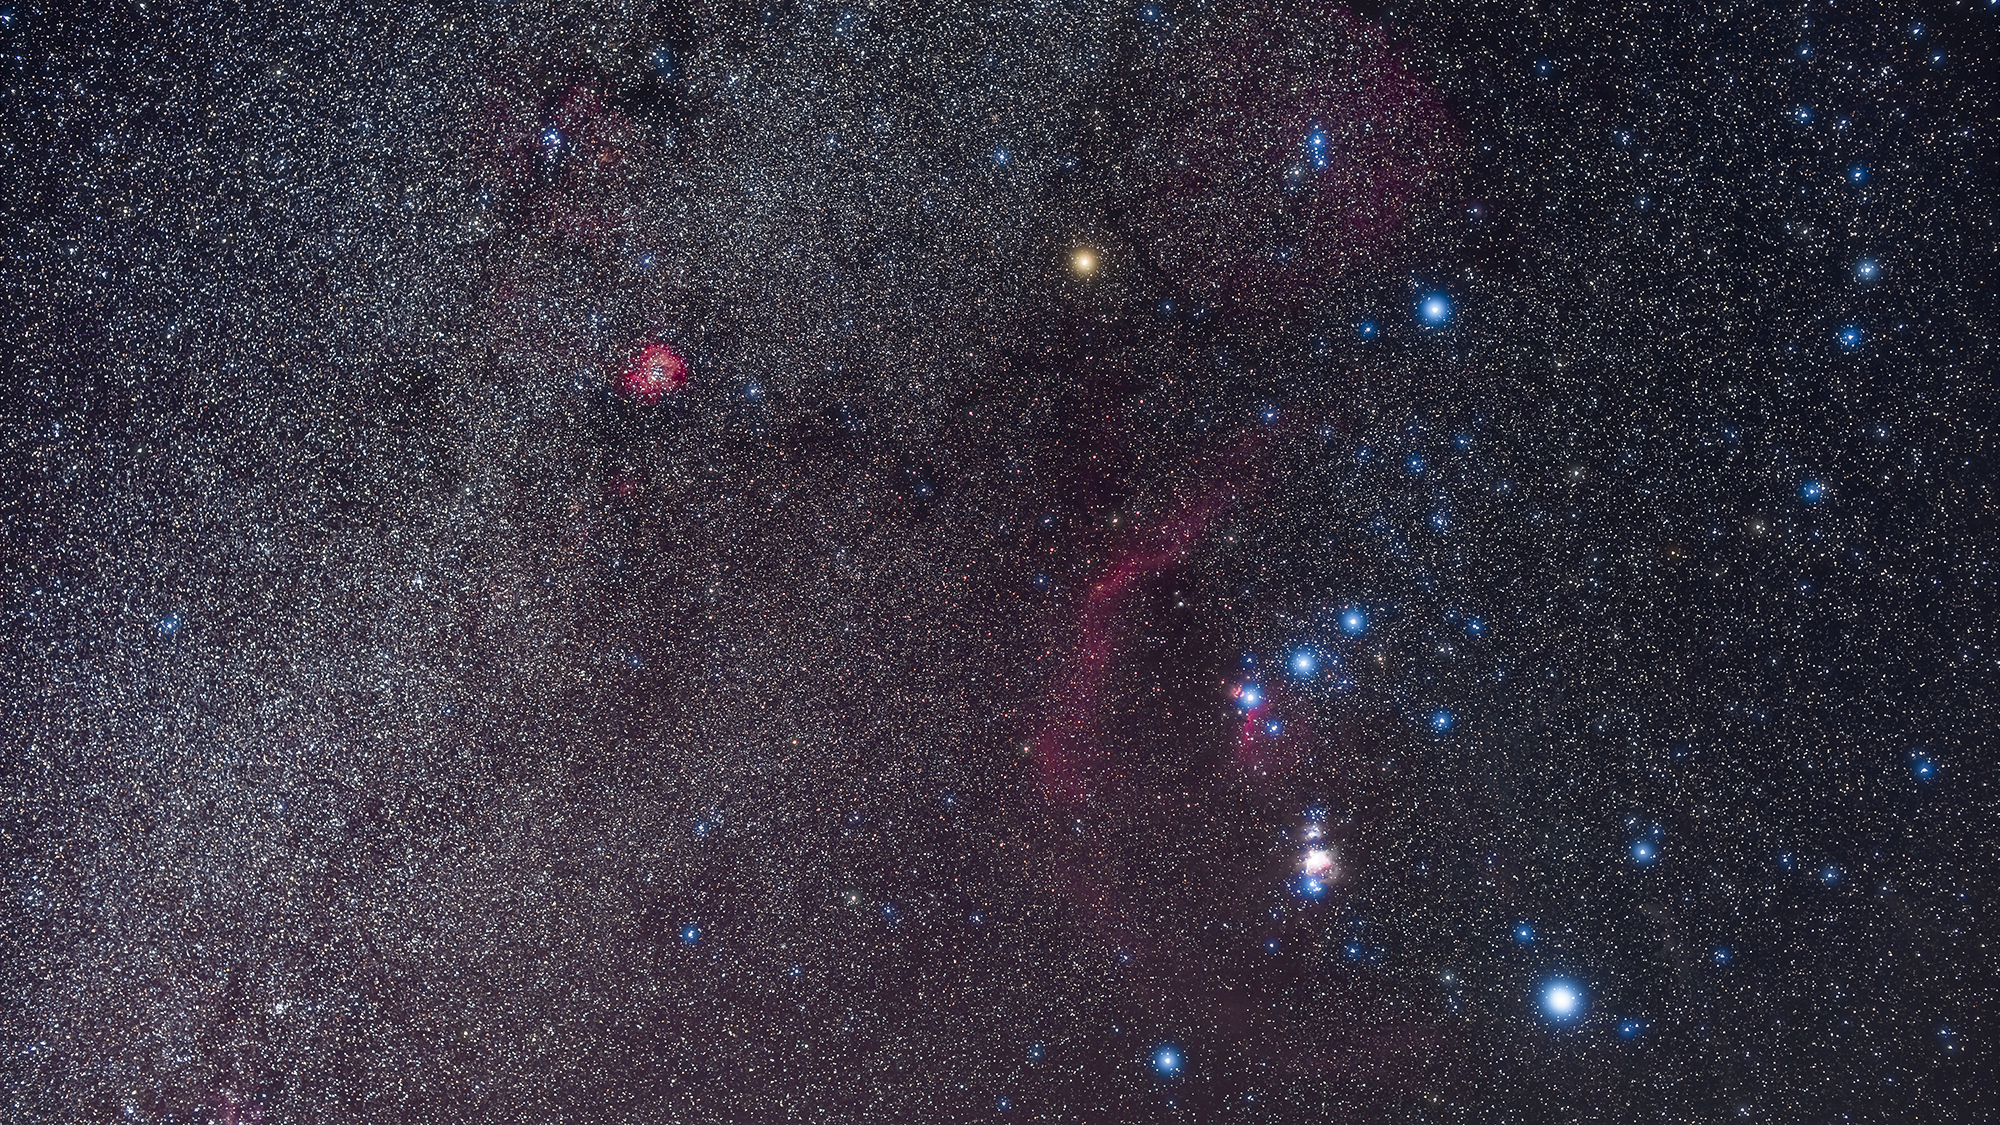 February’s skies shine with Orion, a harmless comet, and an extra day of stargazing